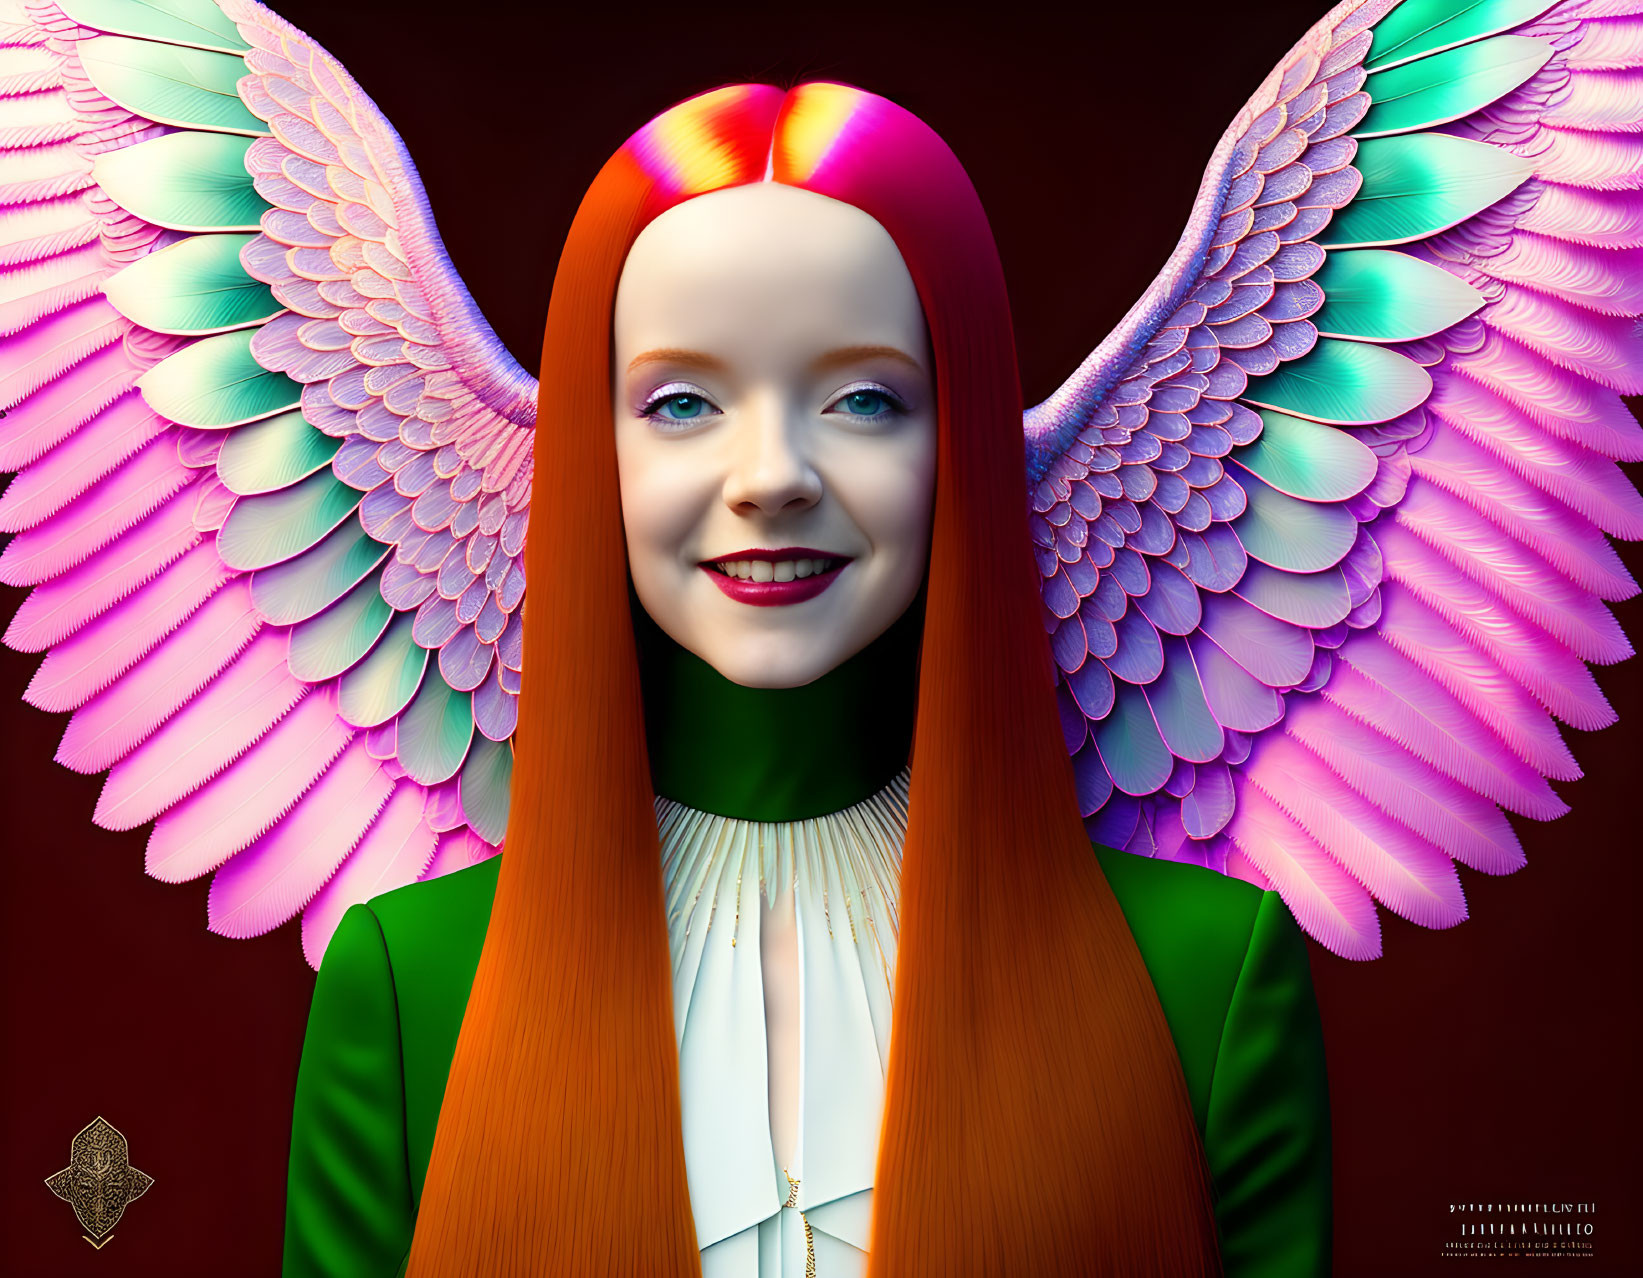 Vibrant digital artwork: Smiling girl with rainbow hair and pink wings on red backdrop